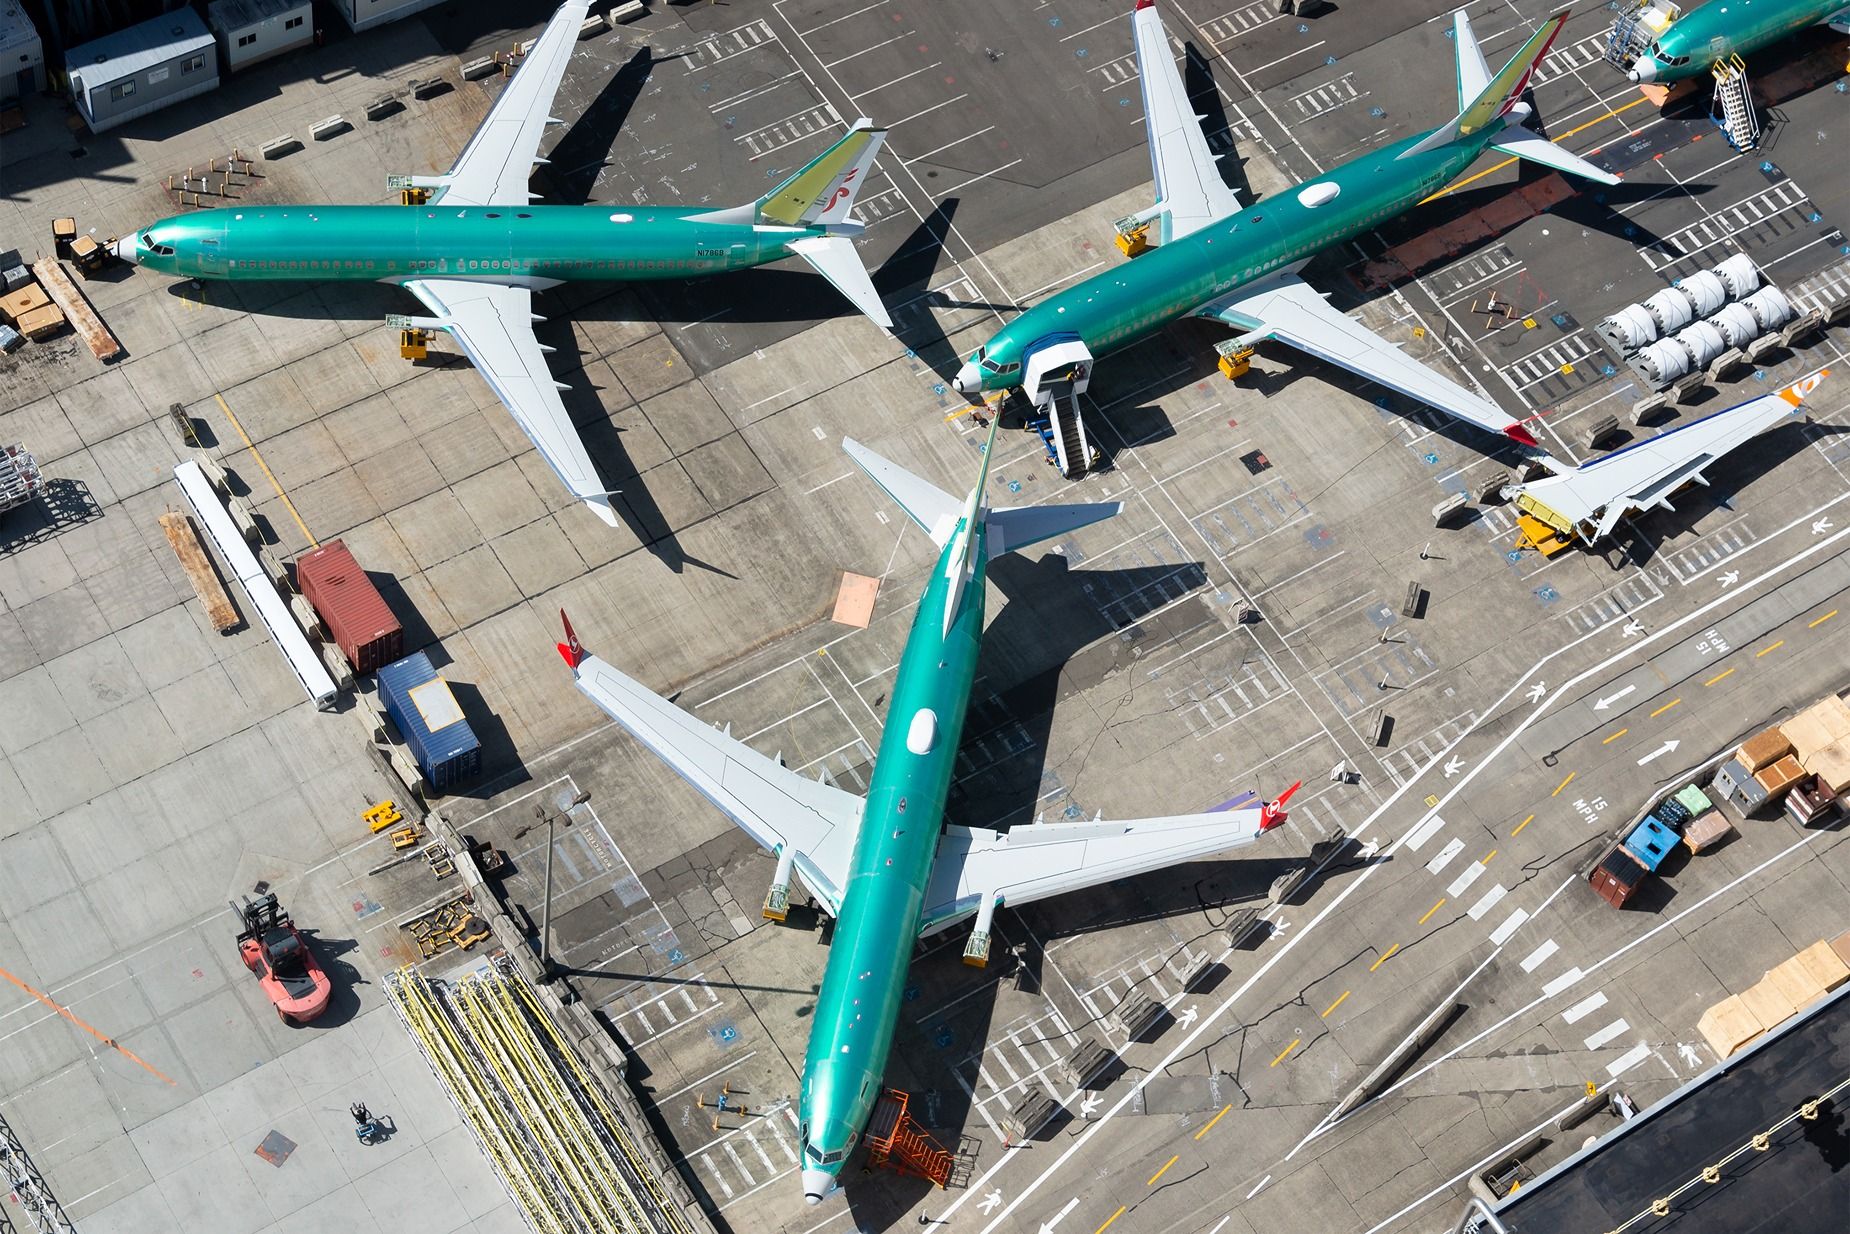 Parked Boeing 737 MAX aircraft shutterstock_1544062010